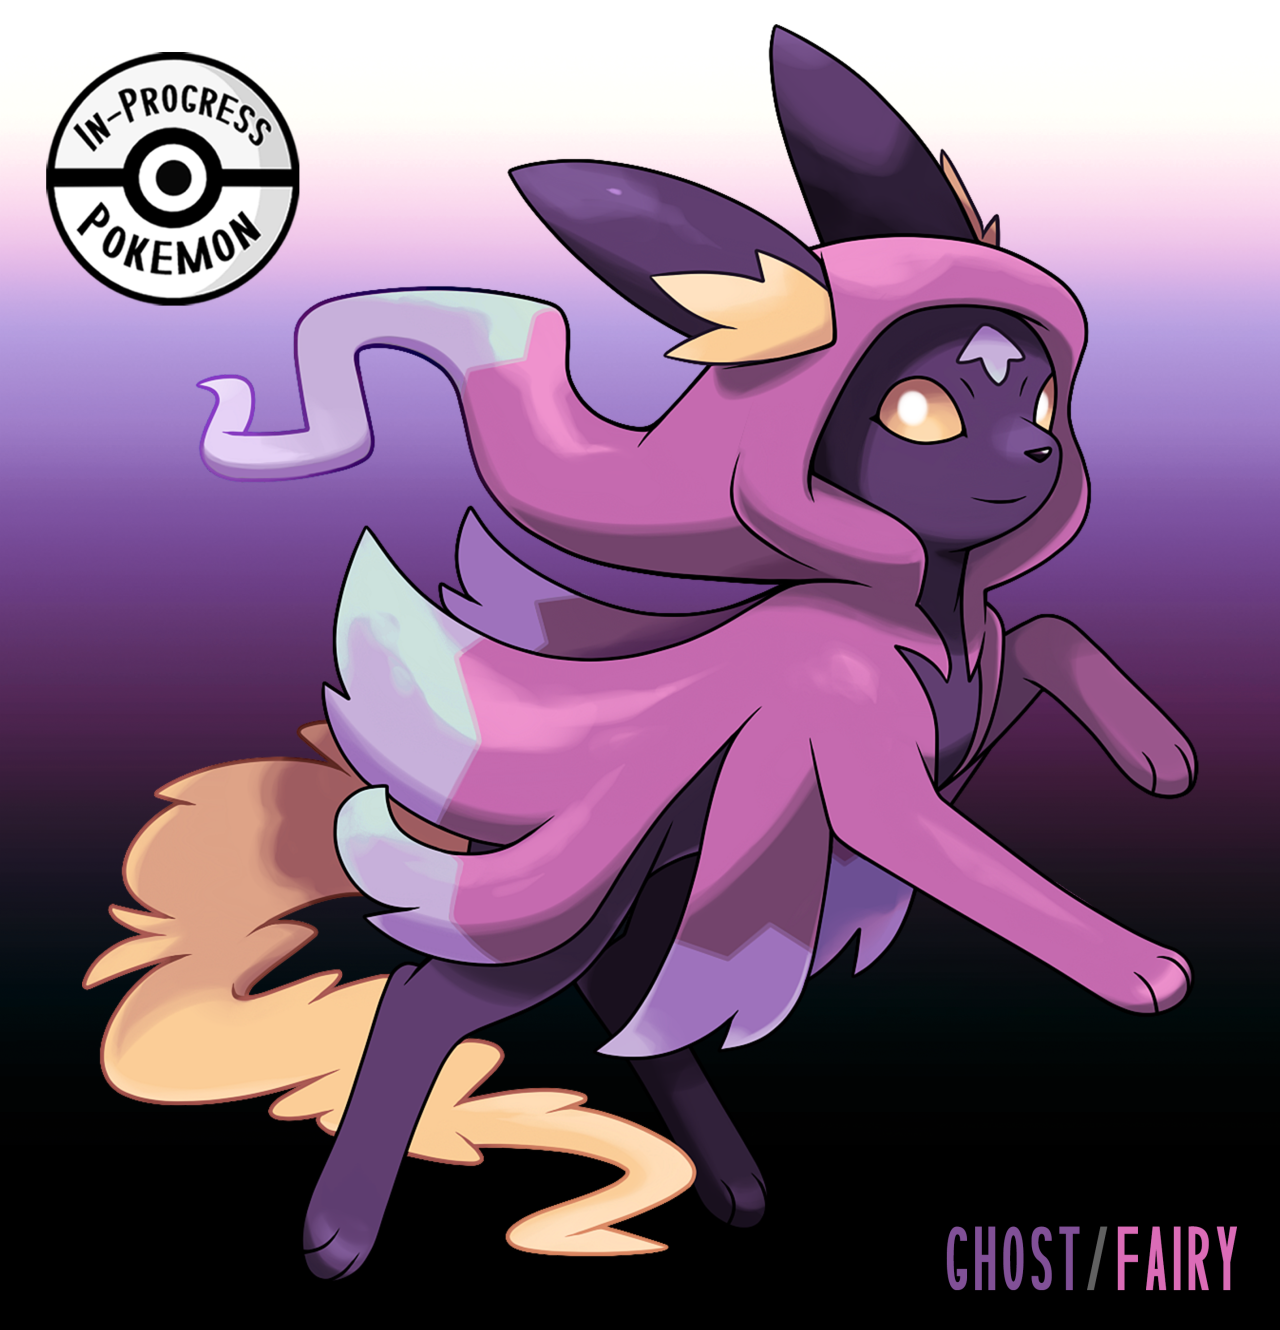 What if the EEVEELUTIONS had DUAL-TYPED EVOLUTIONS? 